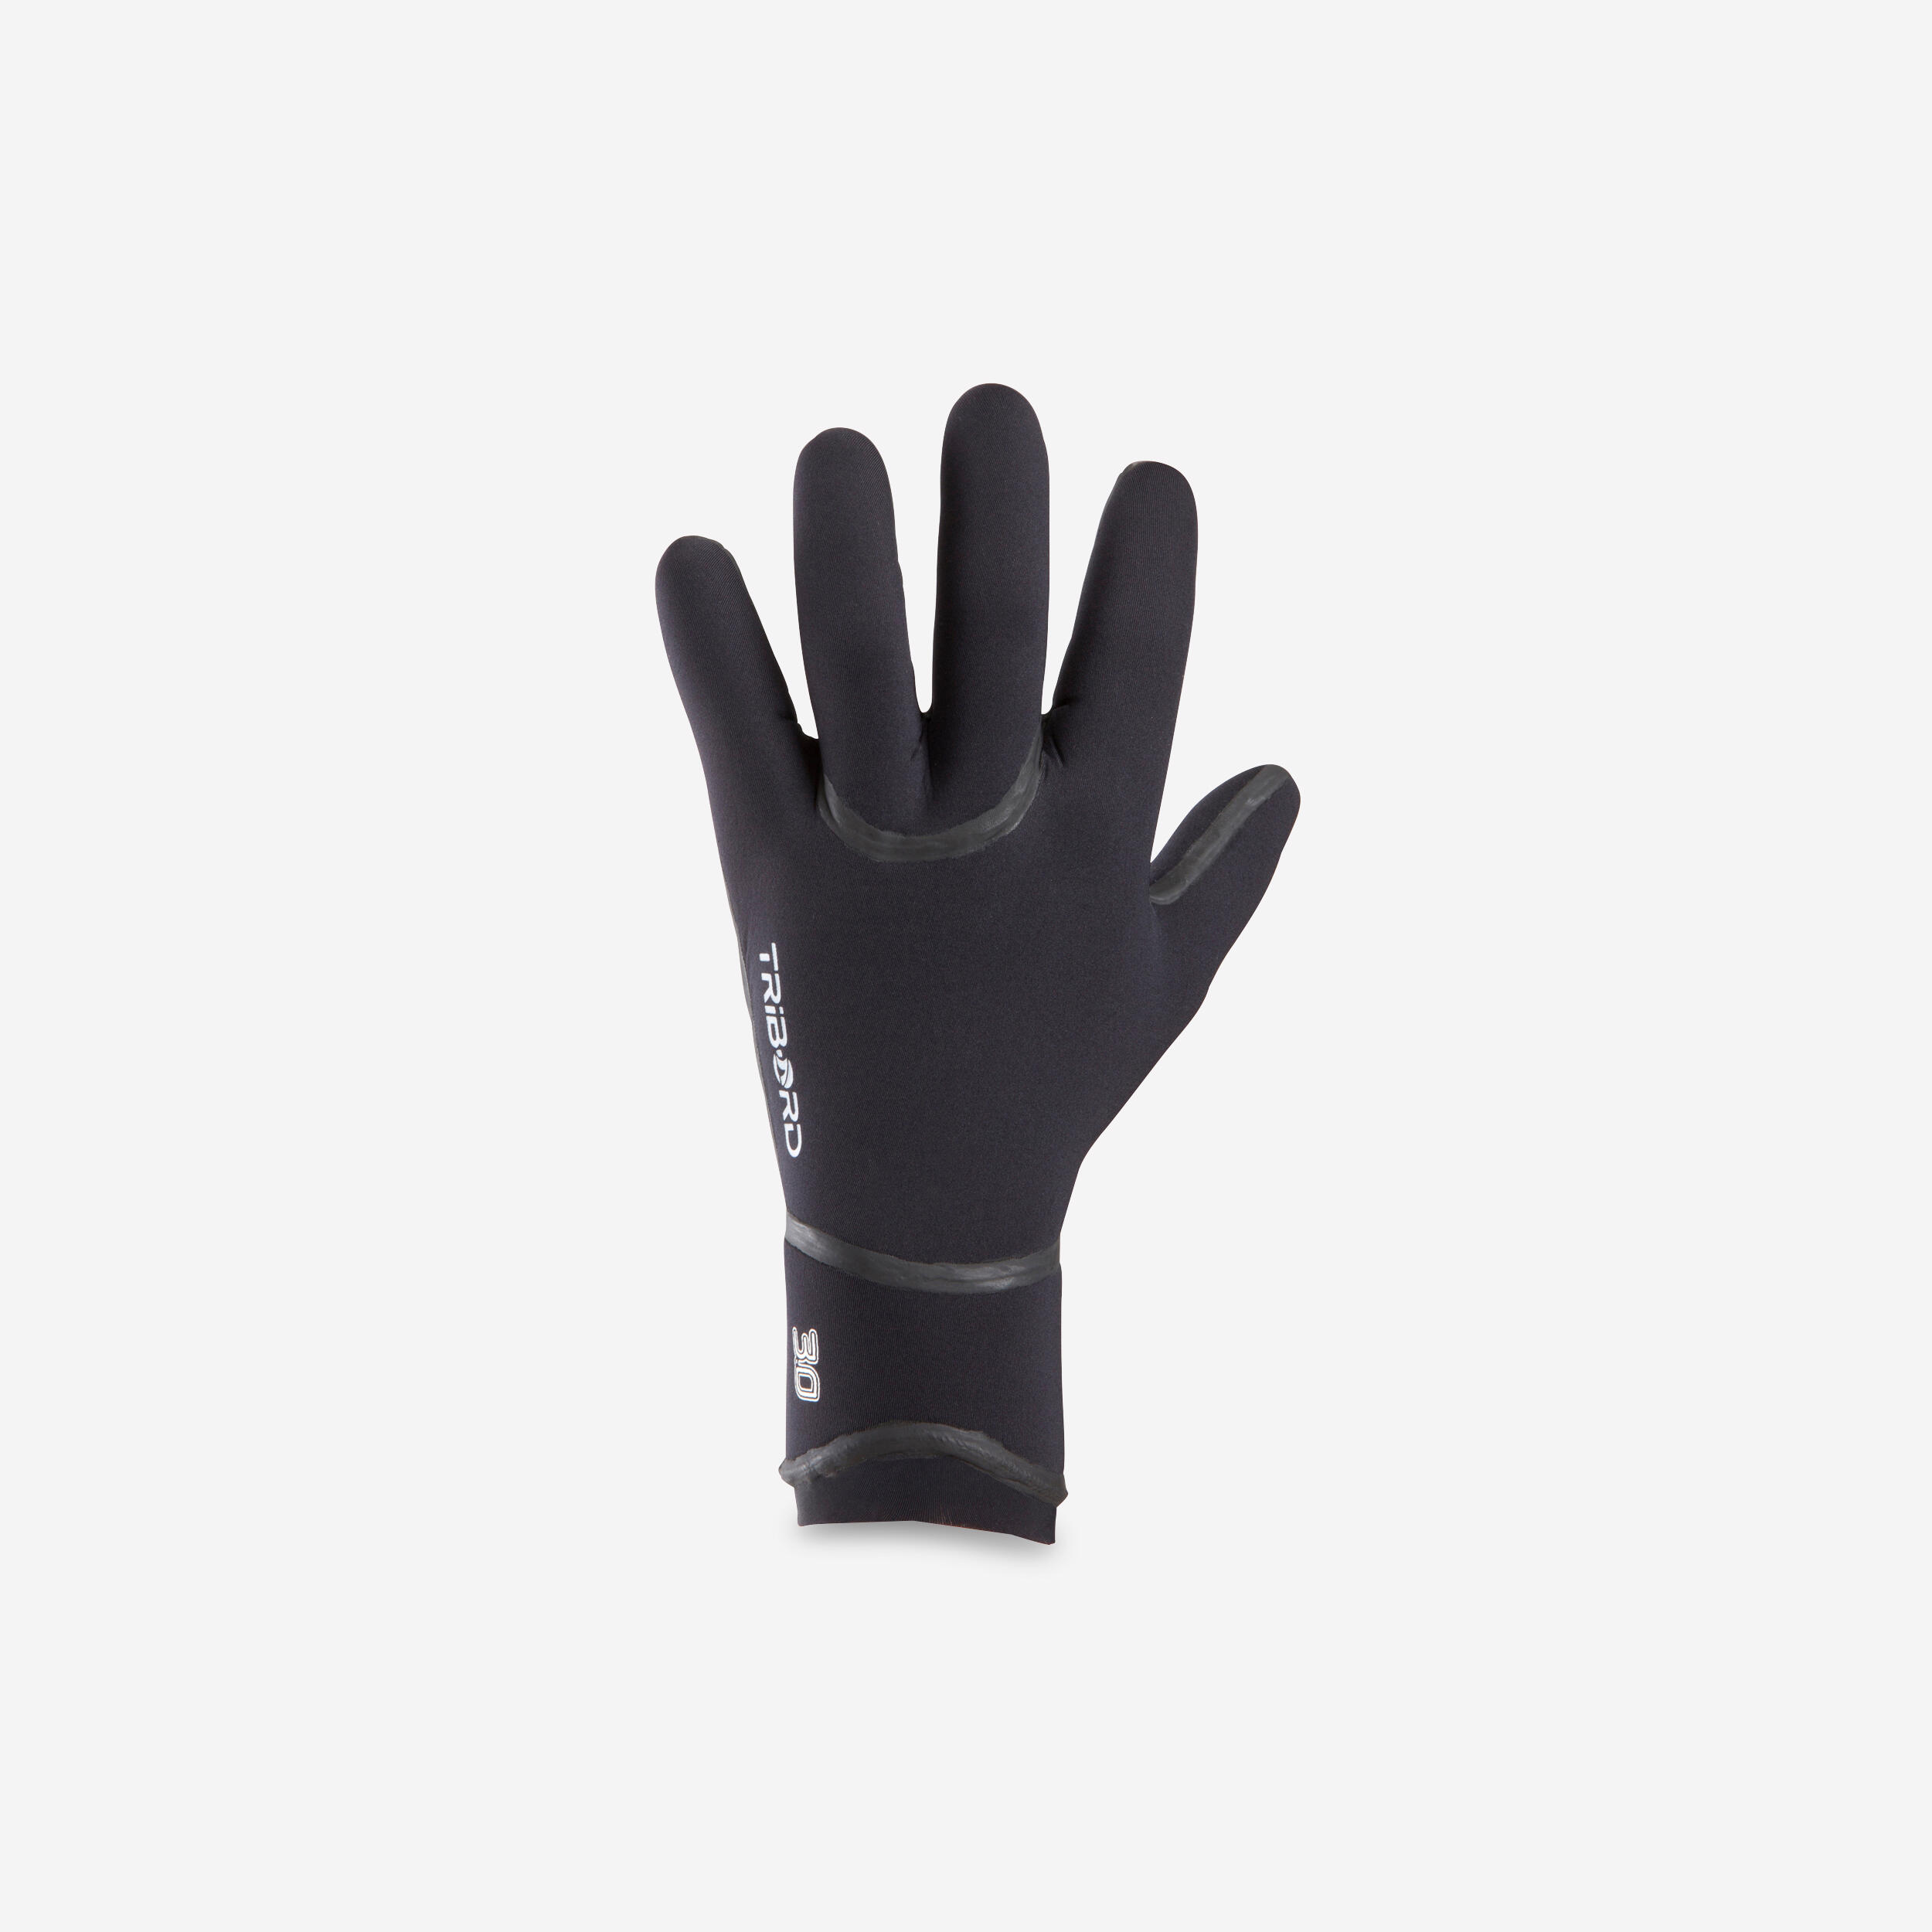 Fishing Neoprene Gloves Thermo with Three Opening Fingers 1 mm - 500 Black  - black - Caperlan - Decathlon